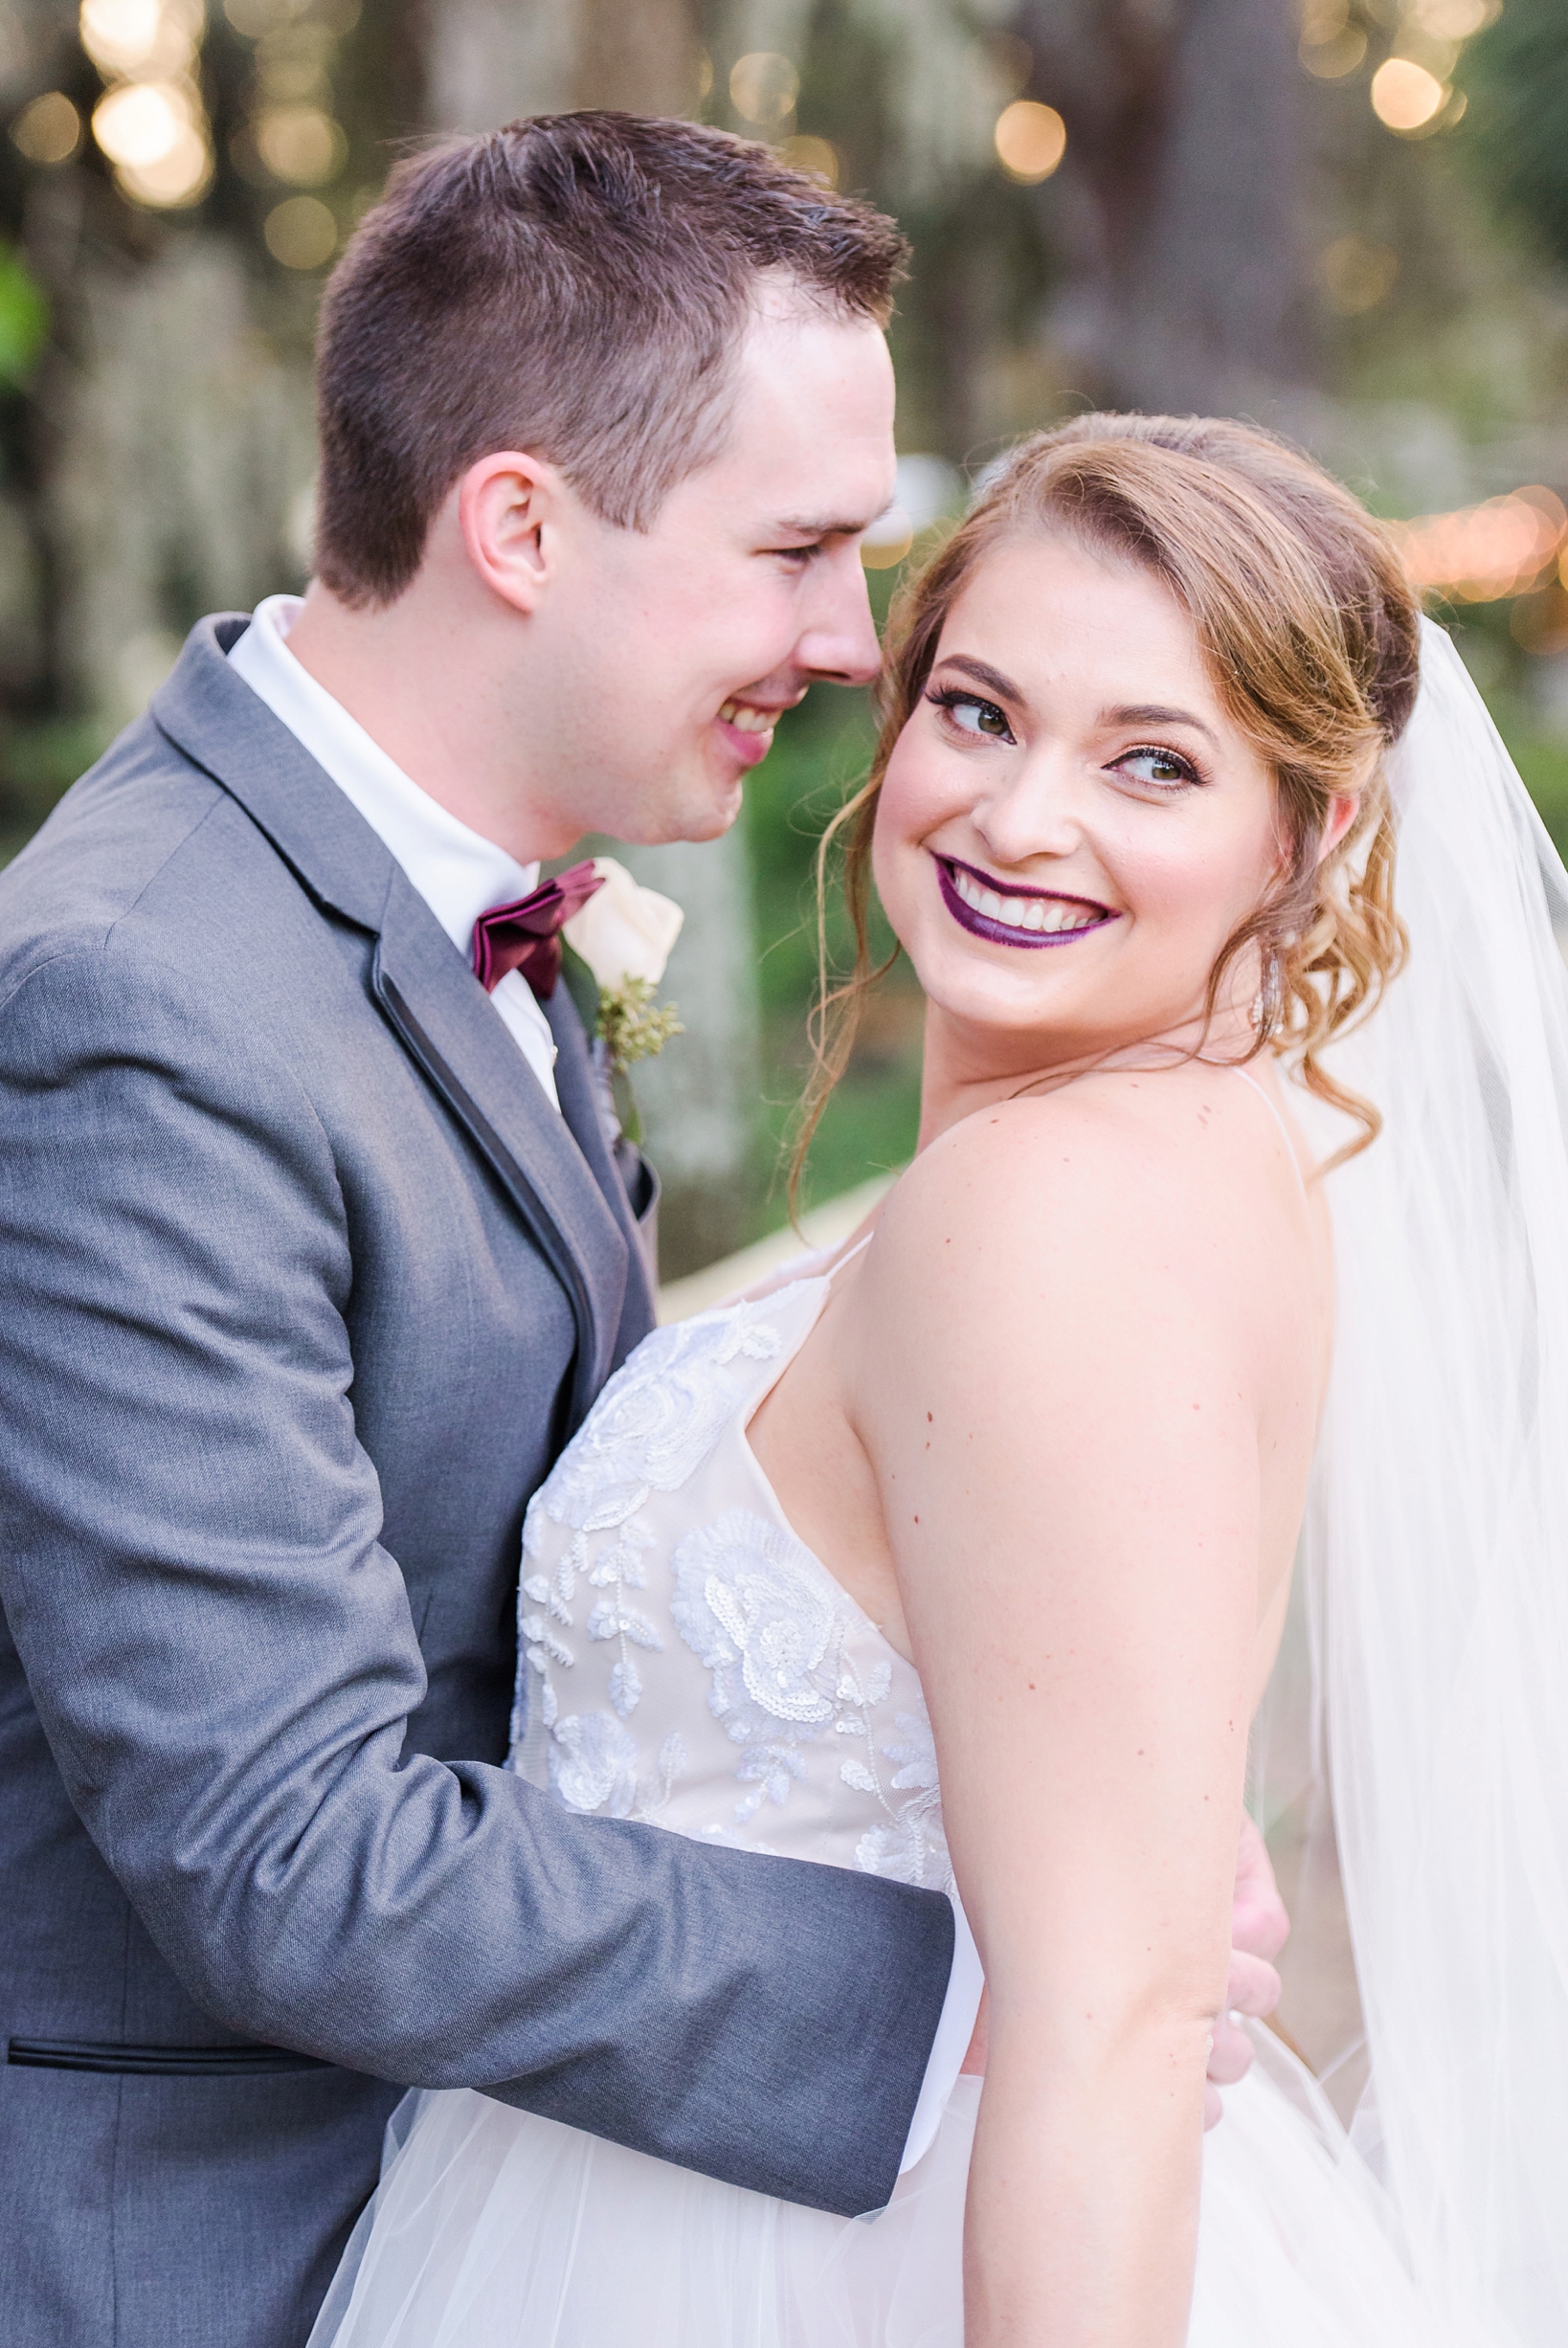 Bokeh fills the background as the Bride and Groom laugh